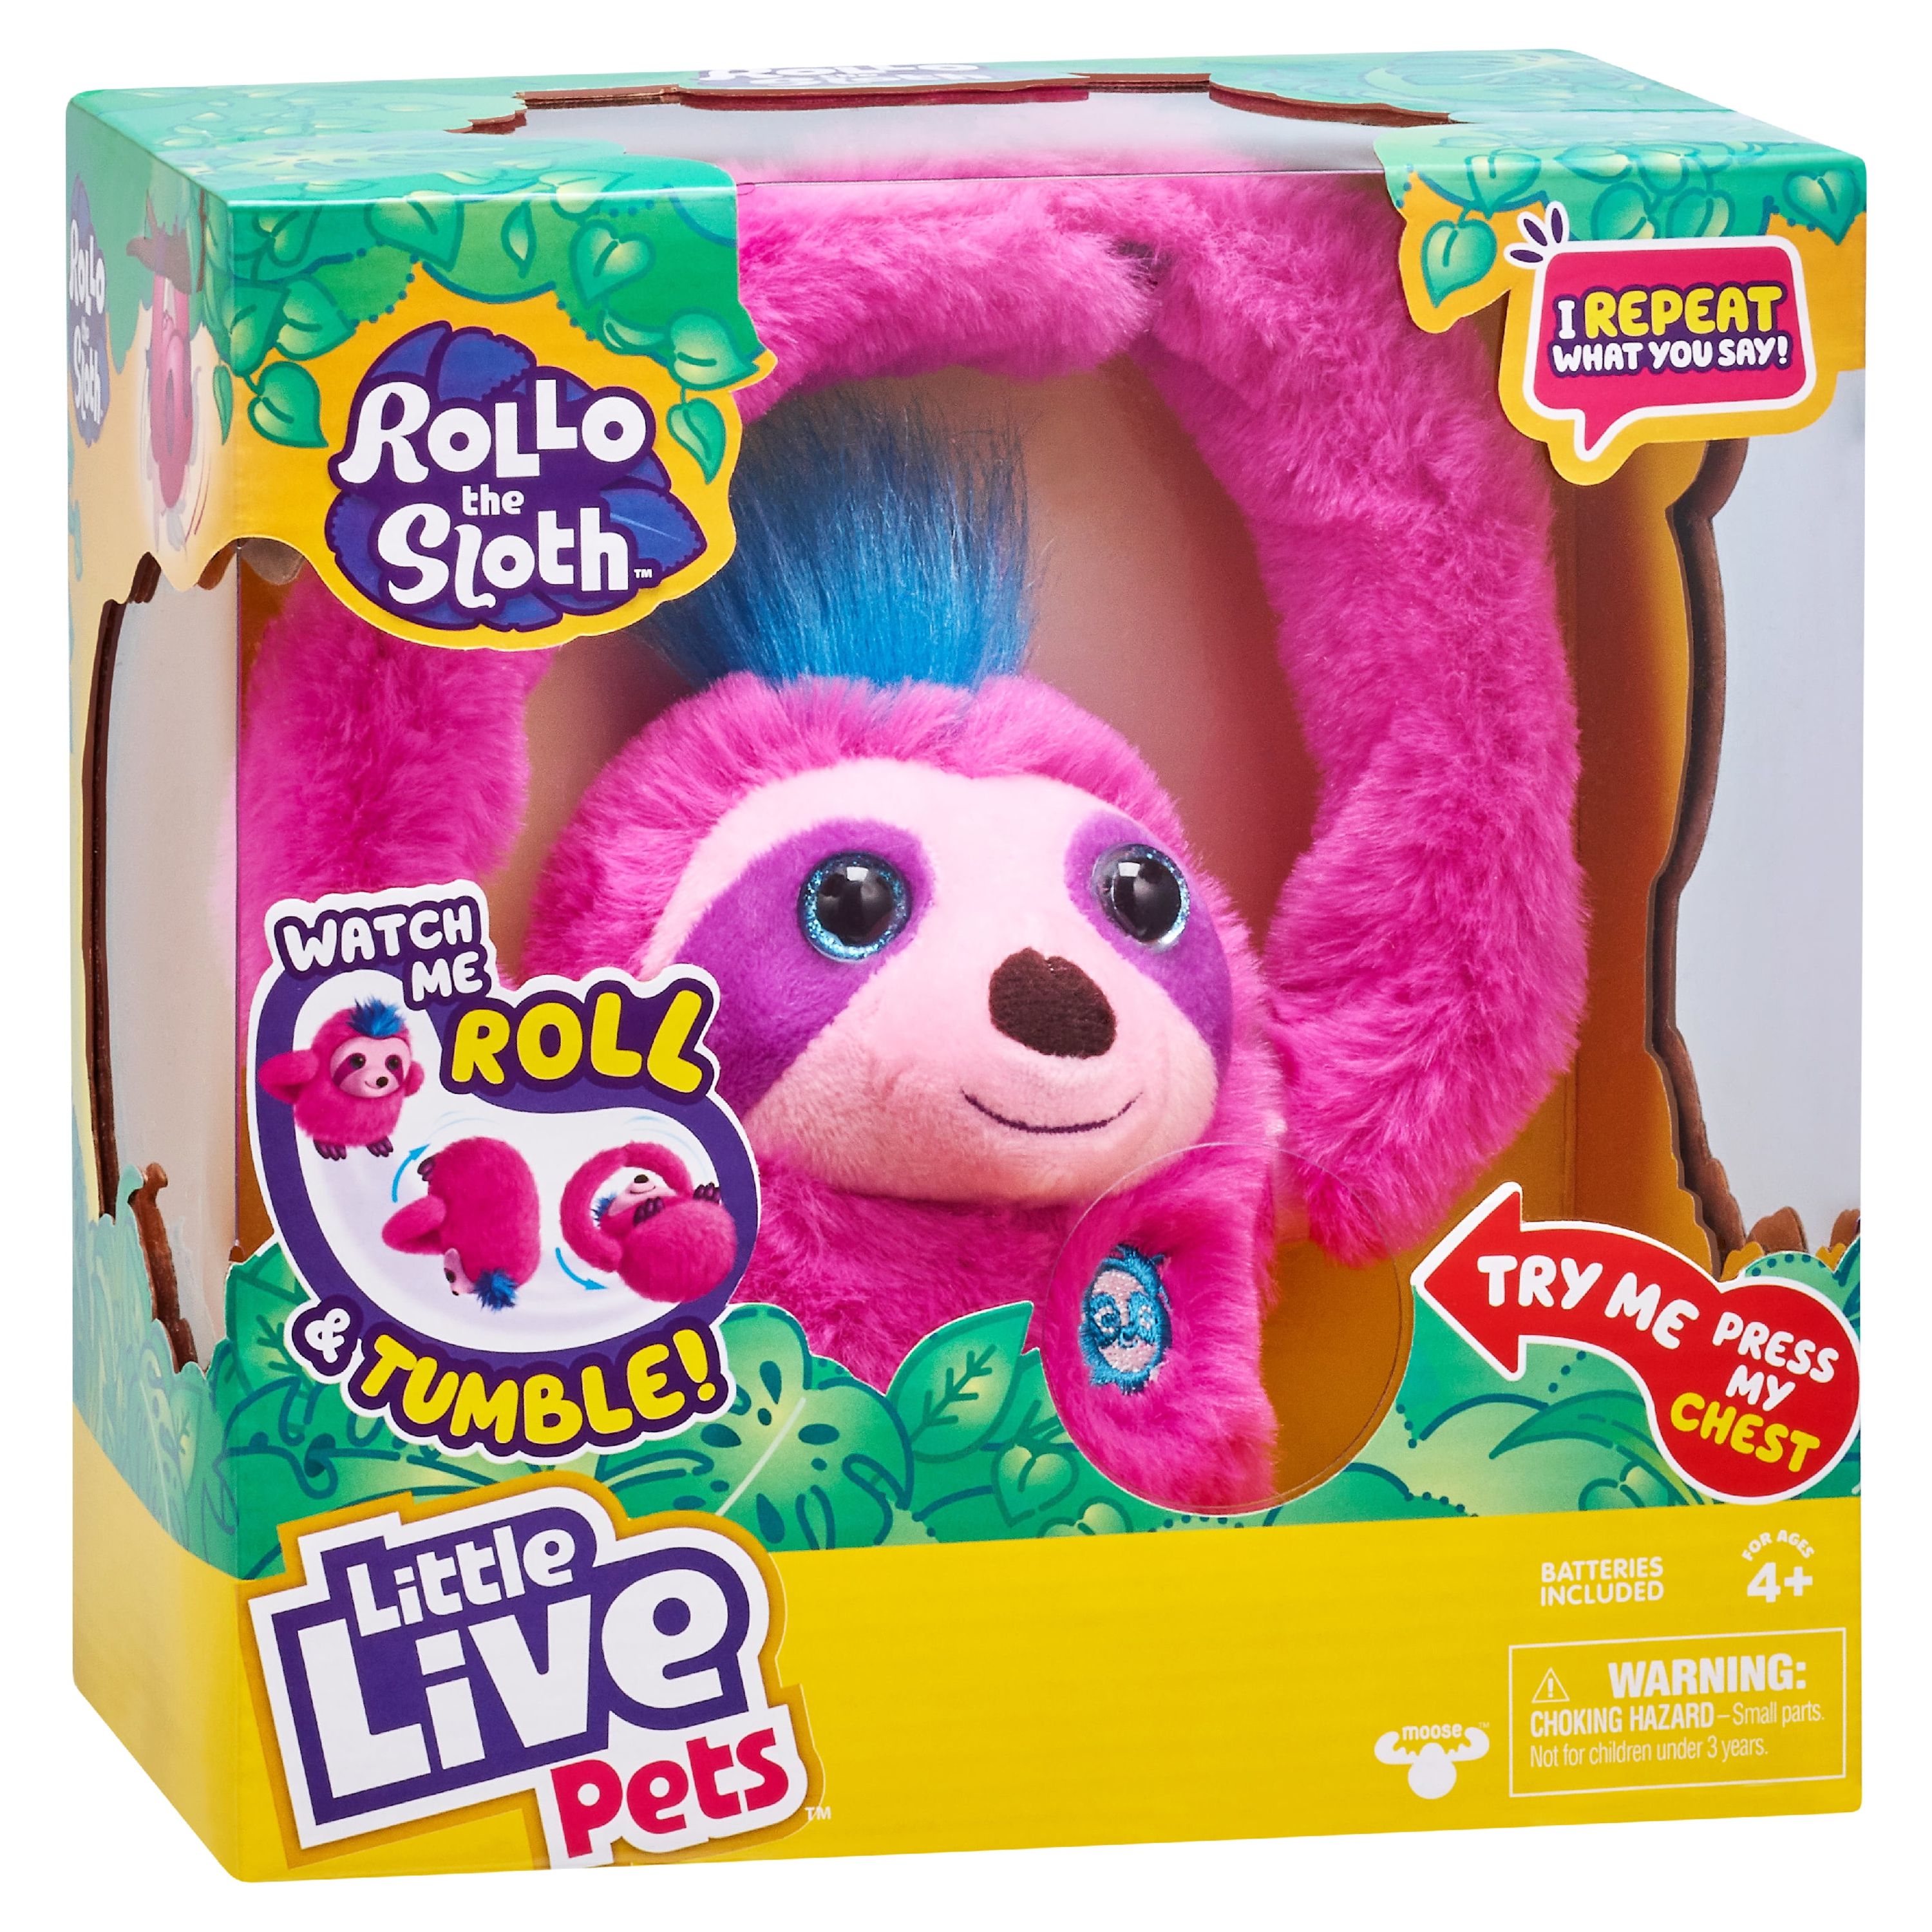 Little Live Pets Rollo the Sloth Electronic Pet with Bendable Arms, Movement, and Sounds - image 2 of 11